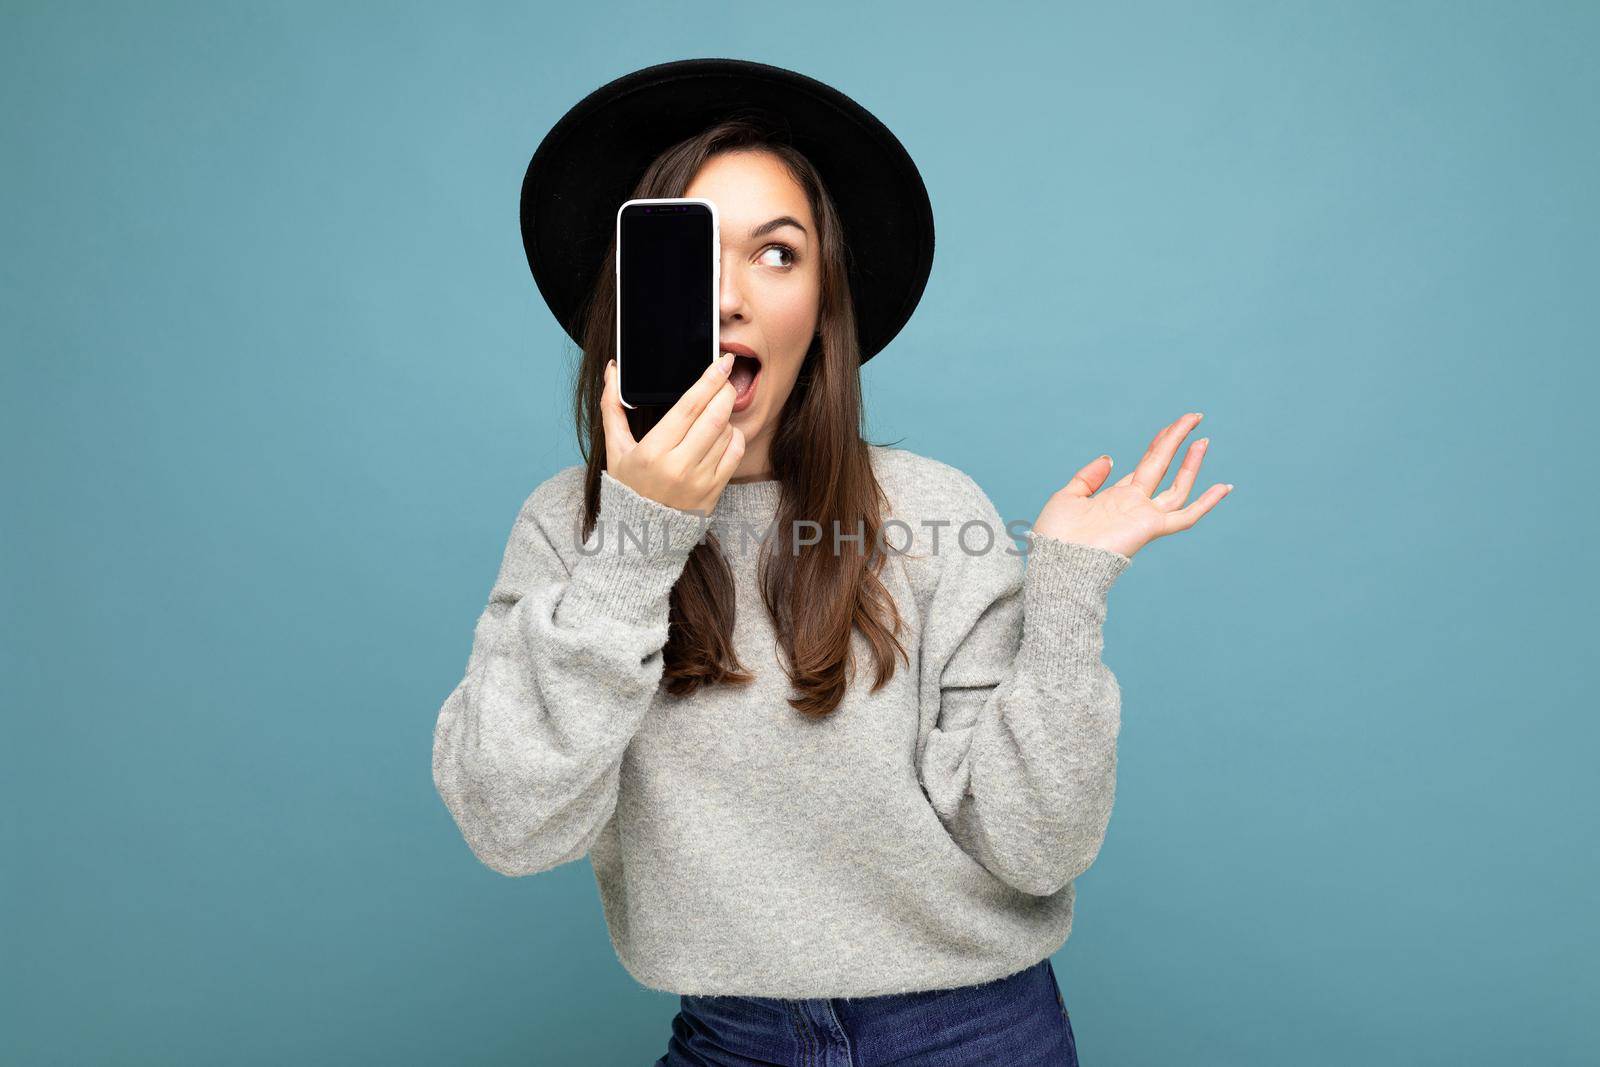 Amazed Beautiful positive woman wearing black hat and grey sweater holding mobilephone showing smartphone isolated on background looking to the side with open mouth.Mock up, cutout, free space. copy space